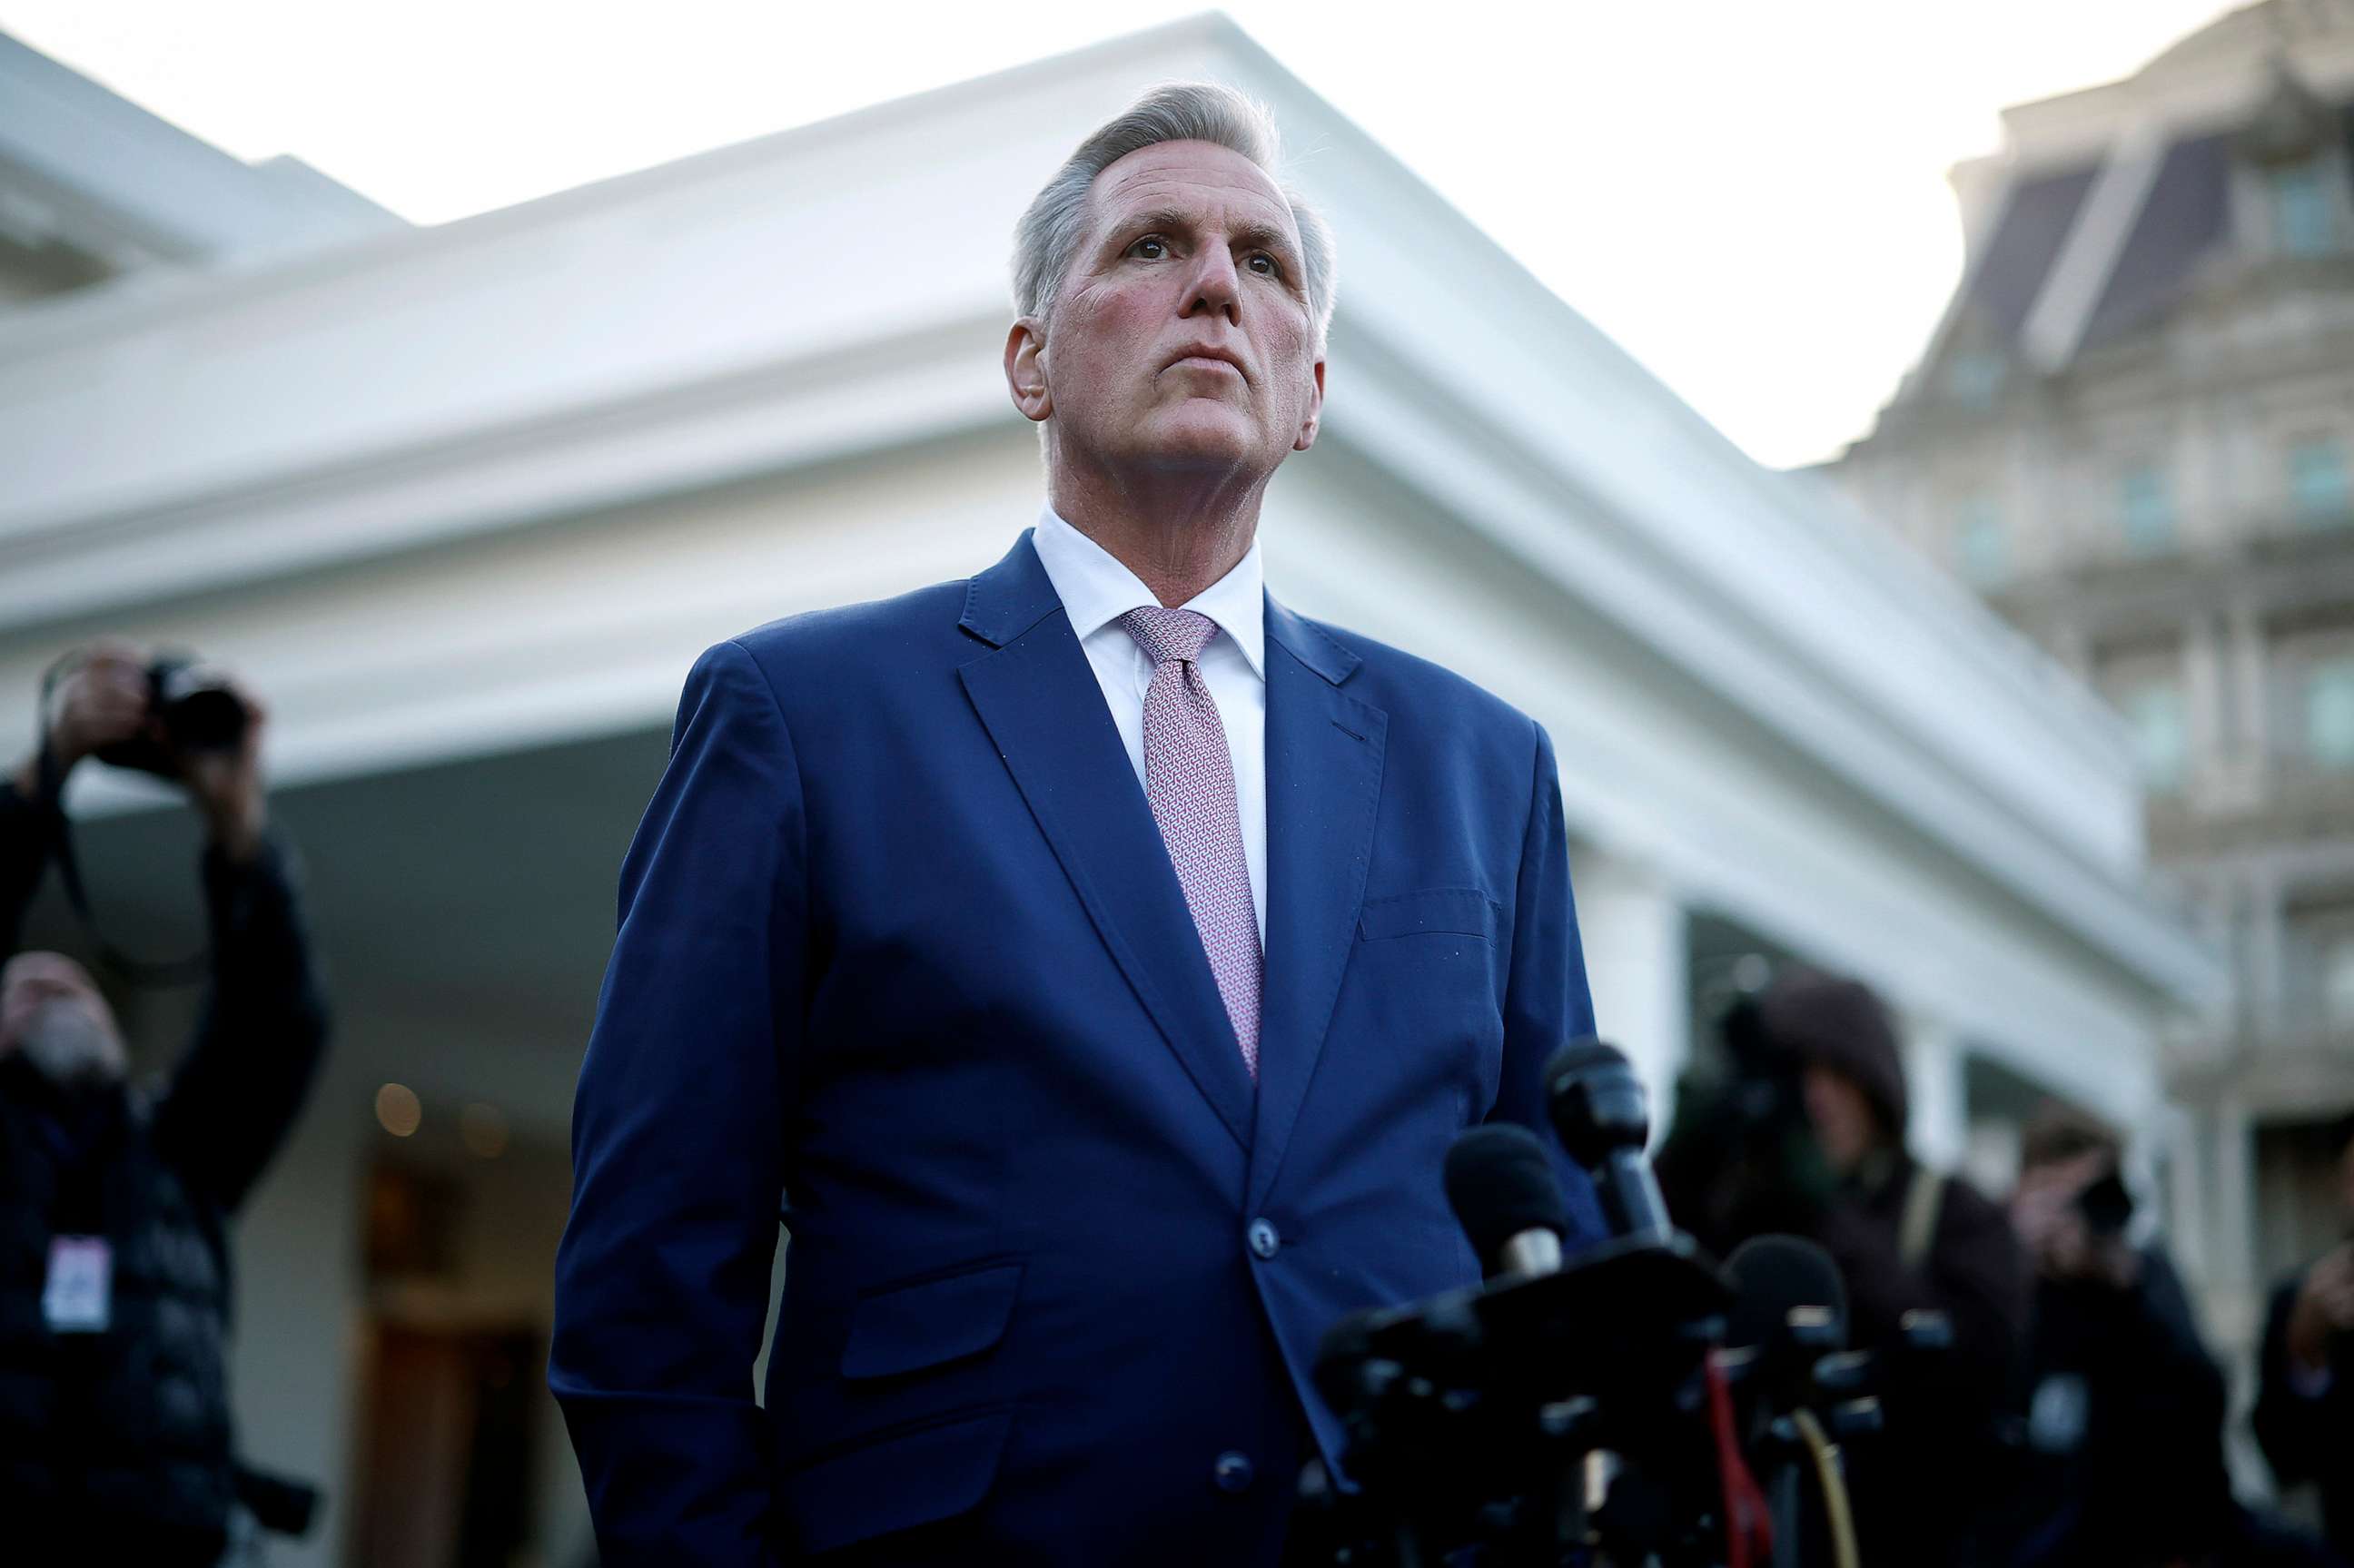 PHOTO: Speaker of the House Kevin McCarthy talks to reporters after meeting with U.S. President Joe Biden at the White House, Feb. 1, 2023, in Washington, D.C.